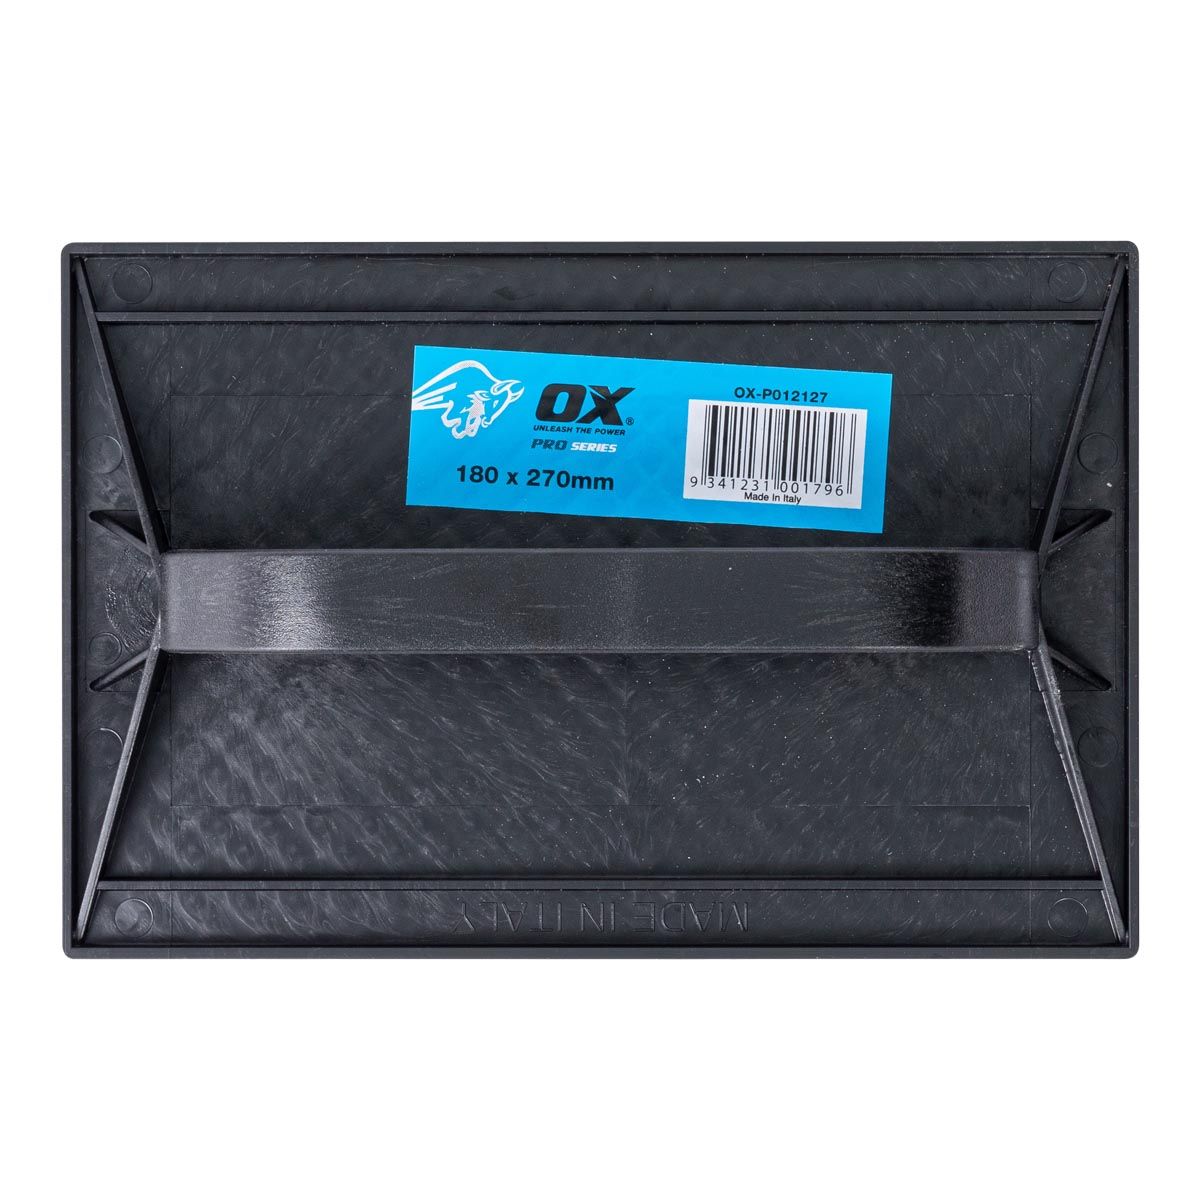 180mm x 270mm Plastic Float OX-P012127 by Ox